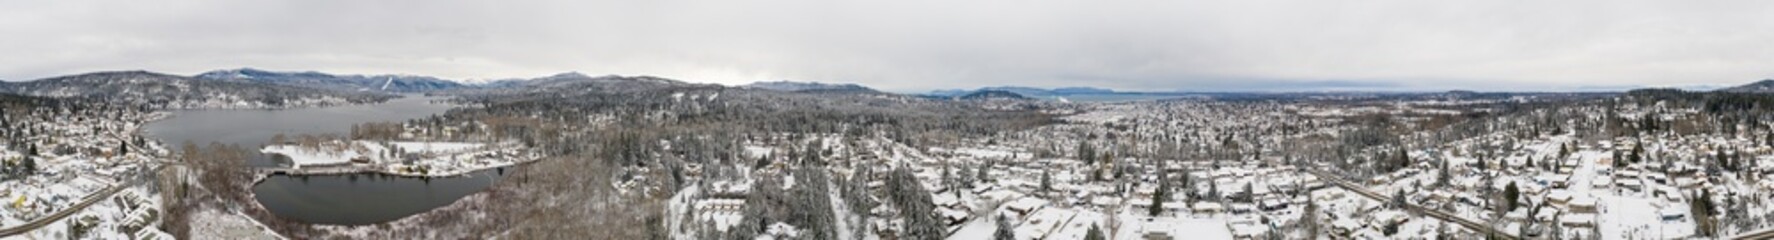 Bellingham Washington Snowy Winter Day 360 Panoramic Aerial Landscape View